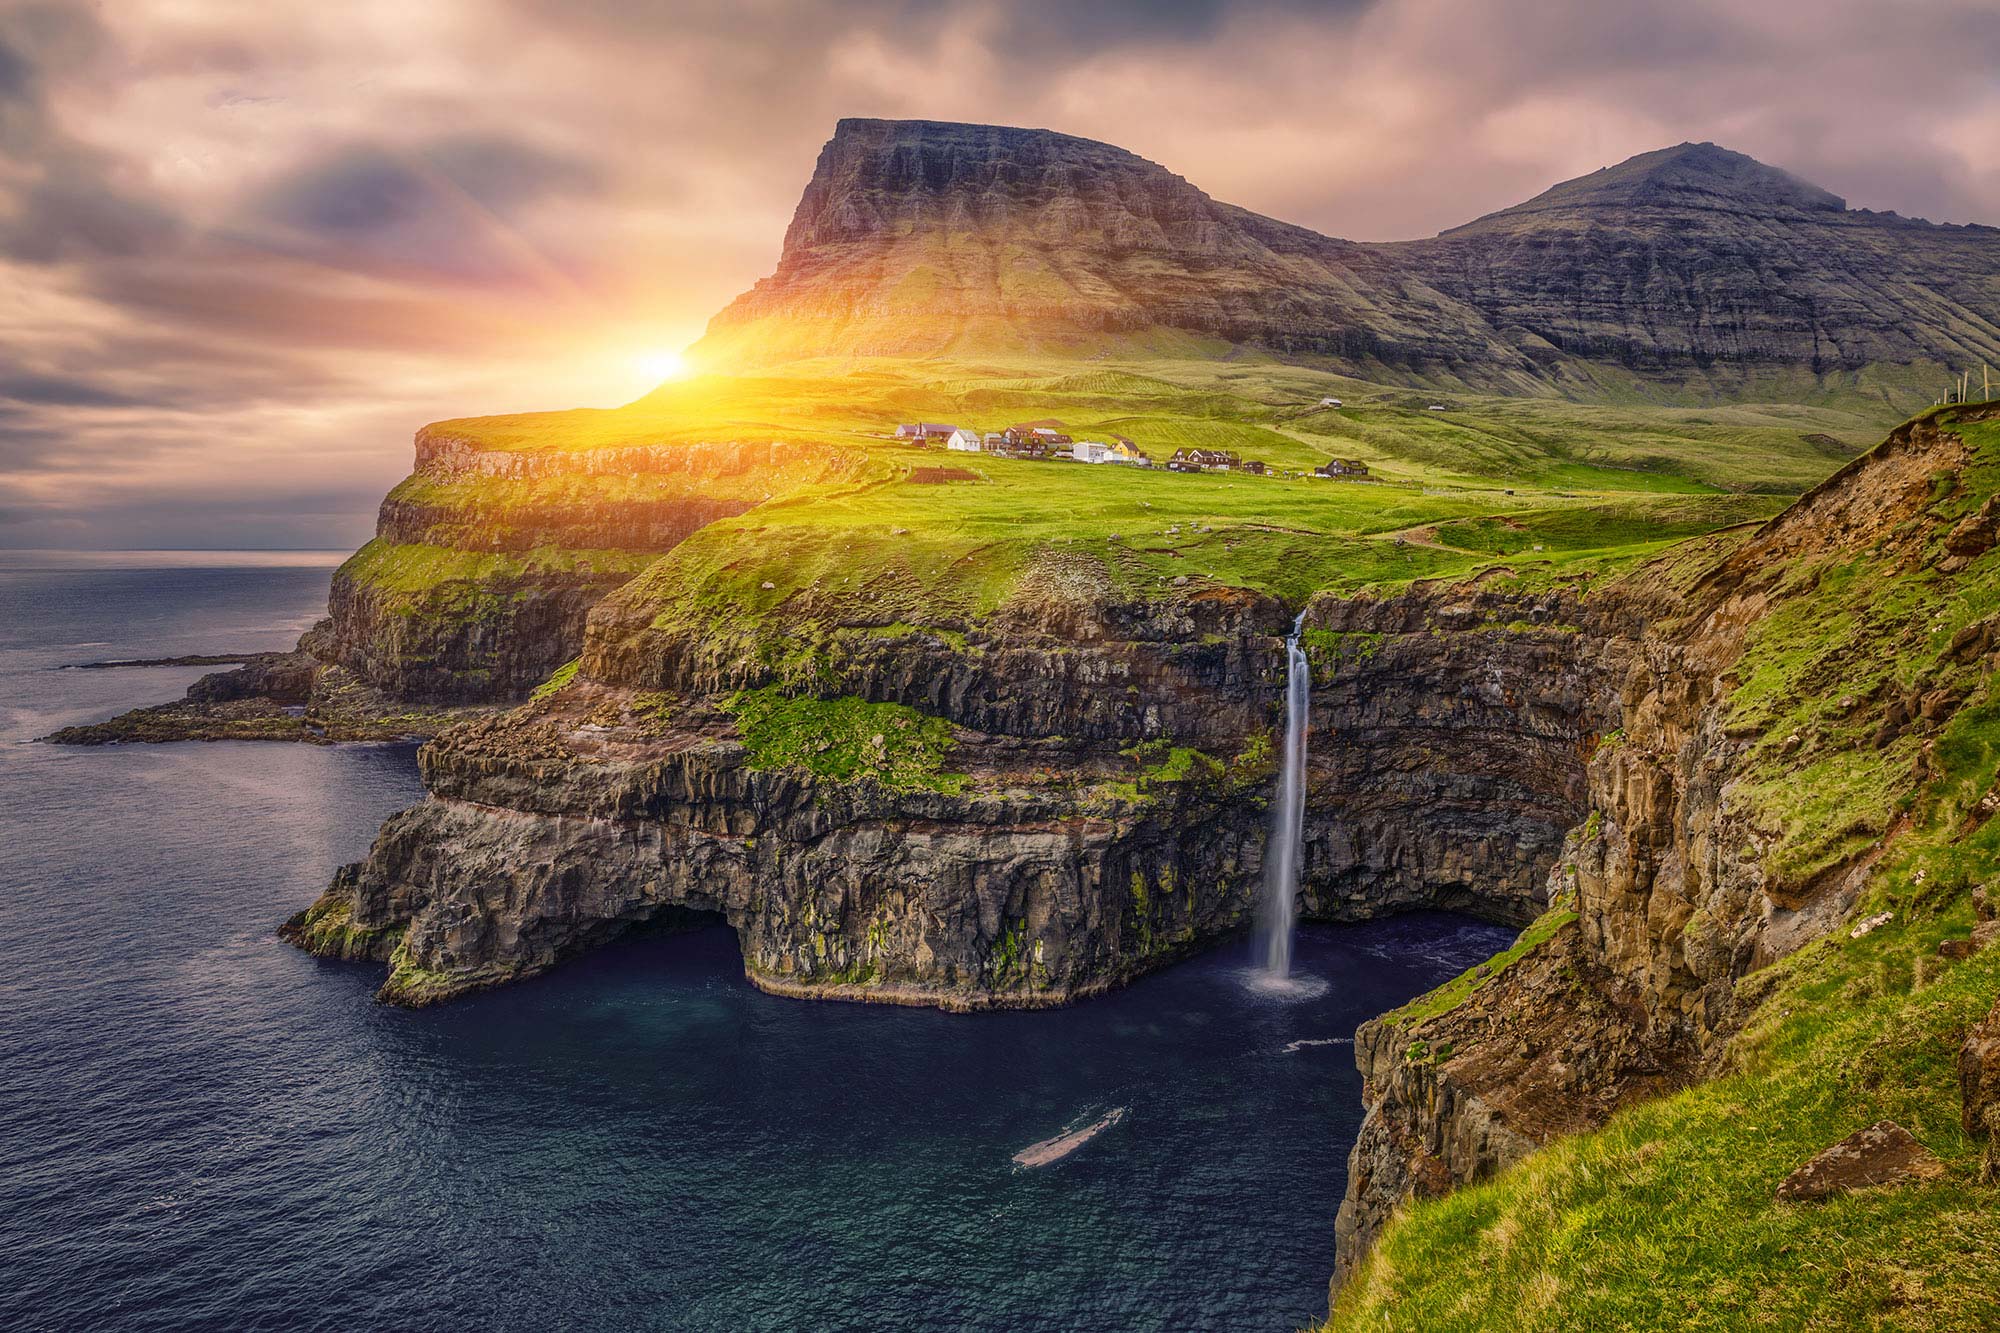 Grassy mountain and cliffs of the Faroe Islands.